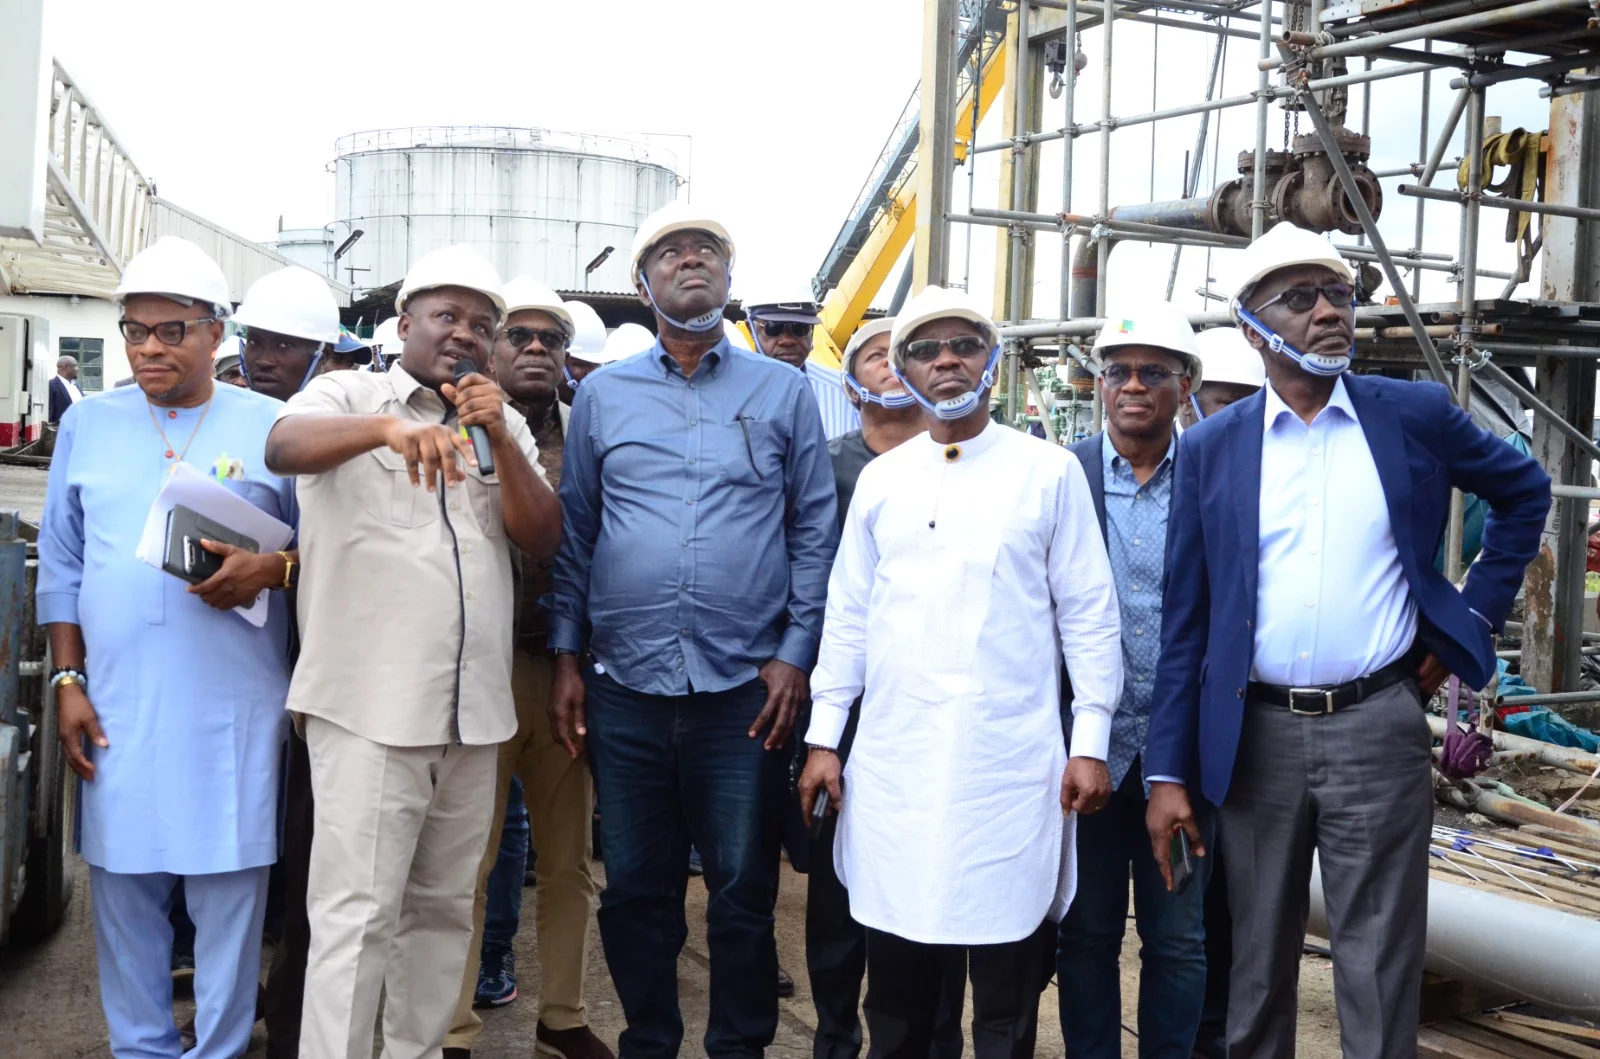 Minister of State for Petroleum (Oil), Sen. Heineken Lokpobiri, (Middle), with Minister of State for Petroleum (Gas), Mr Ekperikpe Ekpo; Permanent Secretary, Ministry of Petroleum Resources, Amb. Gabriel Aduda, Group CEO, NNPC Ltd., Mr Mele Kyari, and others at the Port Harcourt refinery inspection.